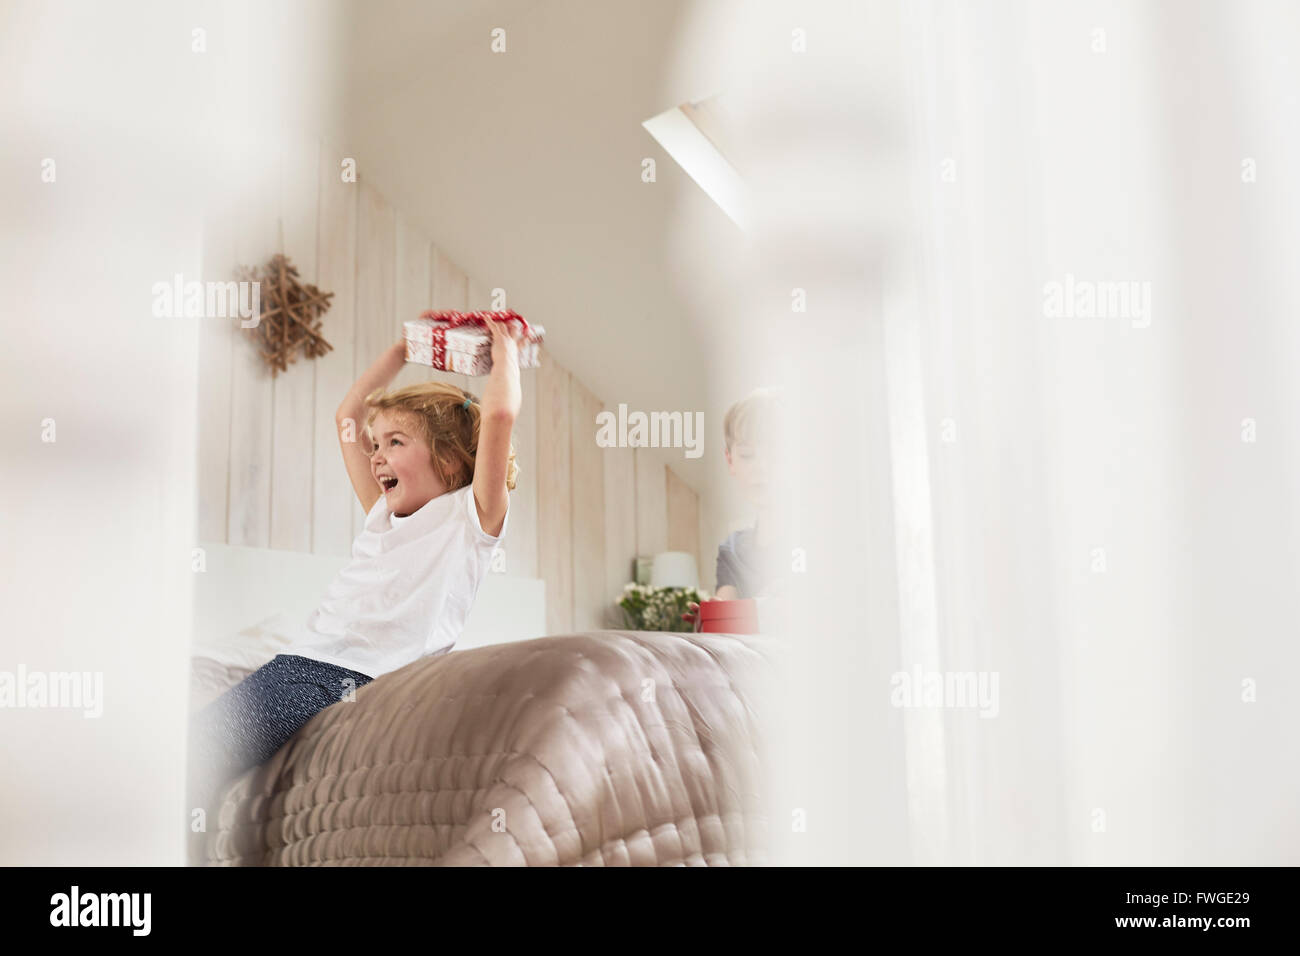 Christmas morning in a family home. A girl  holding a present above her head. Stock Photo